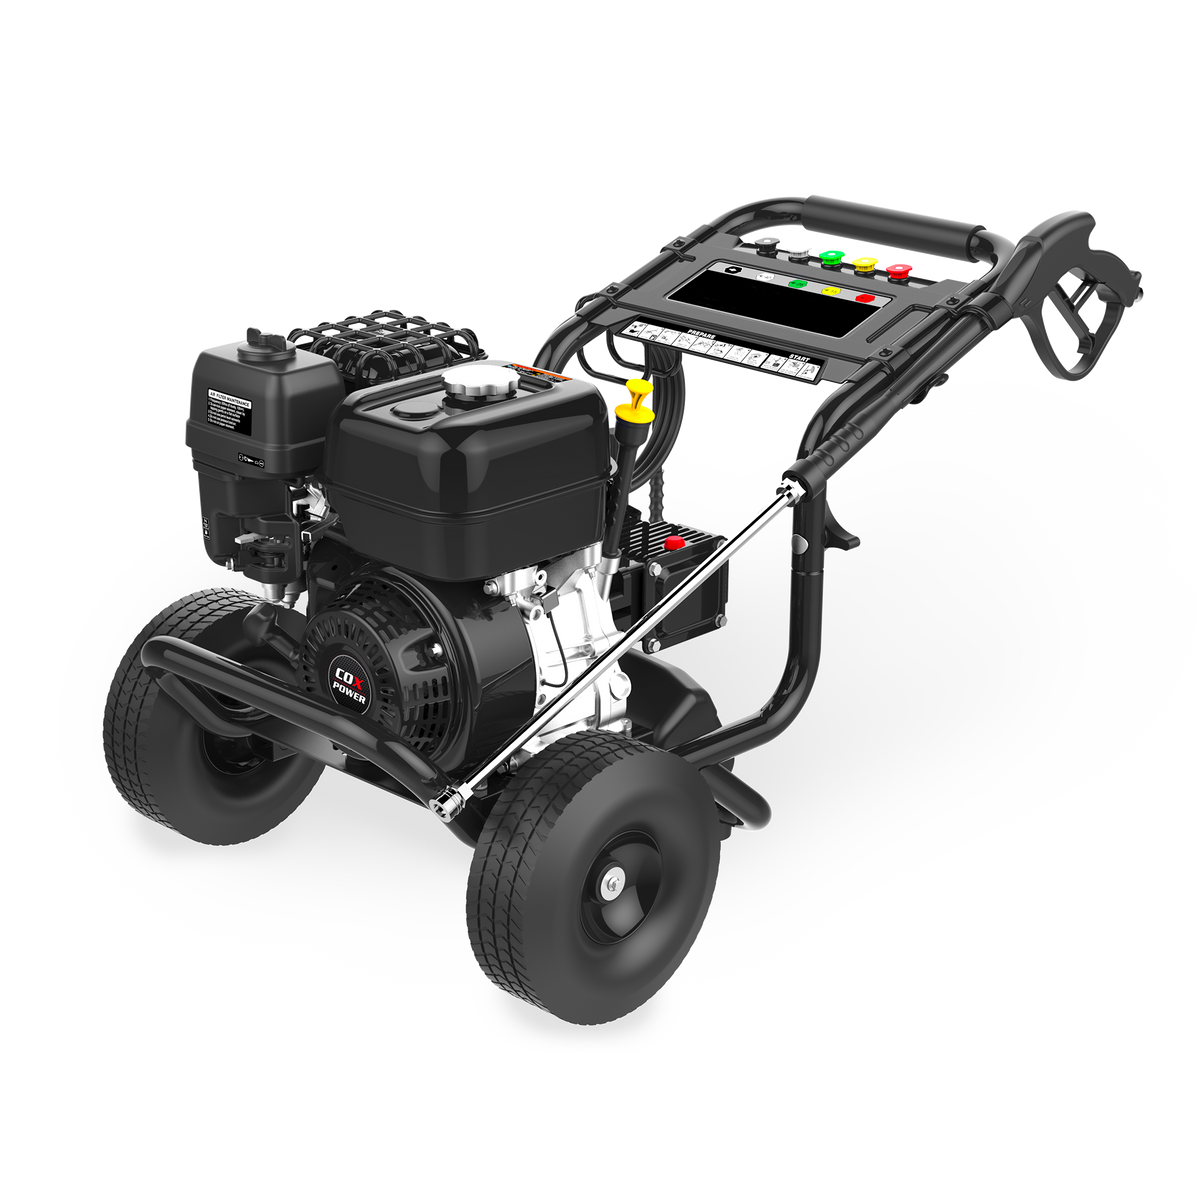 COX Power Pressure Washer 3600psi Product Image